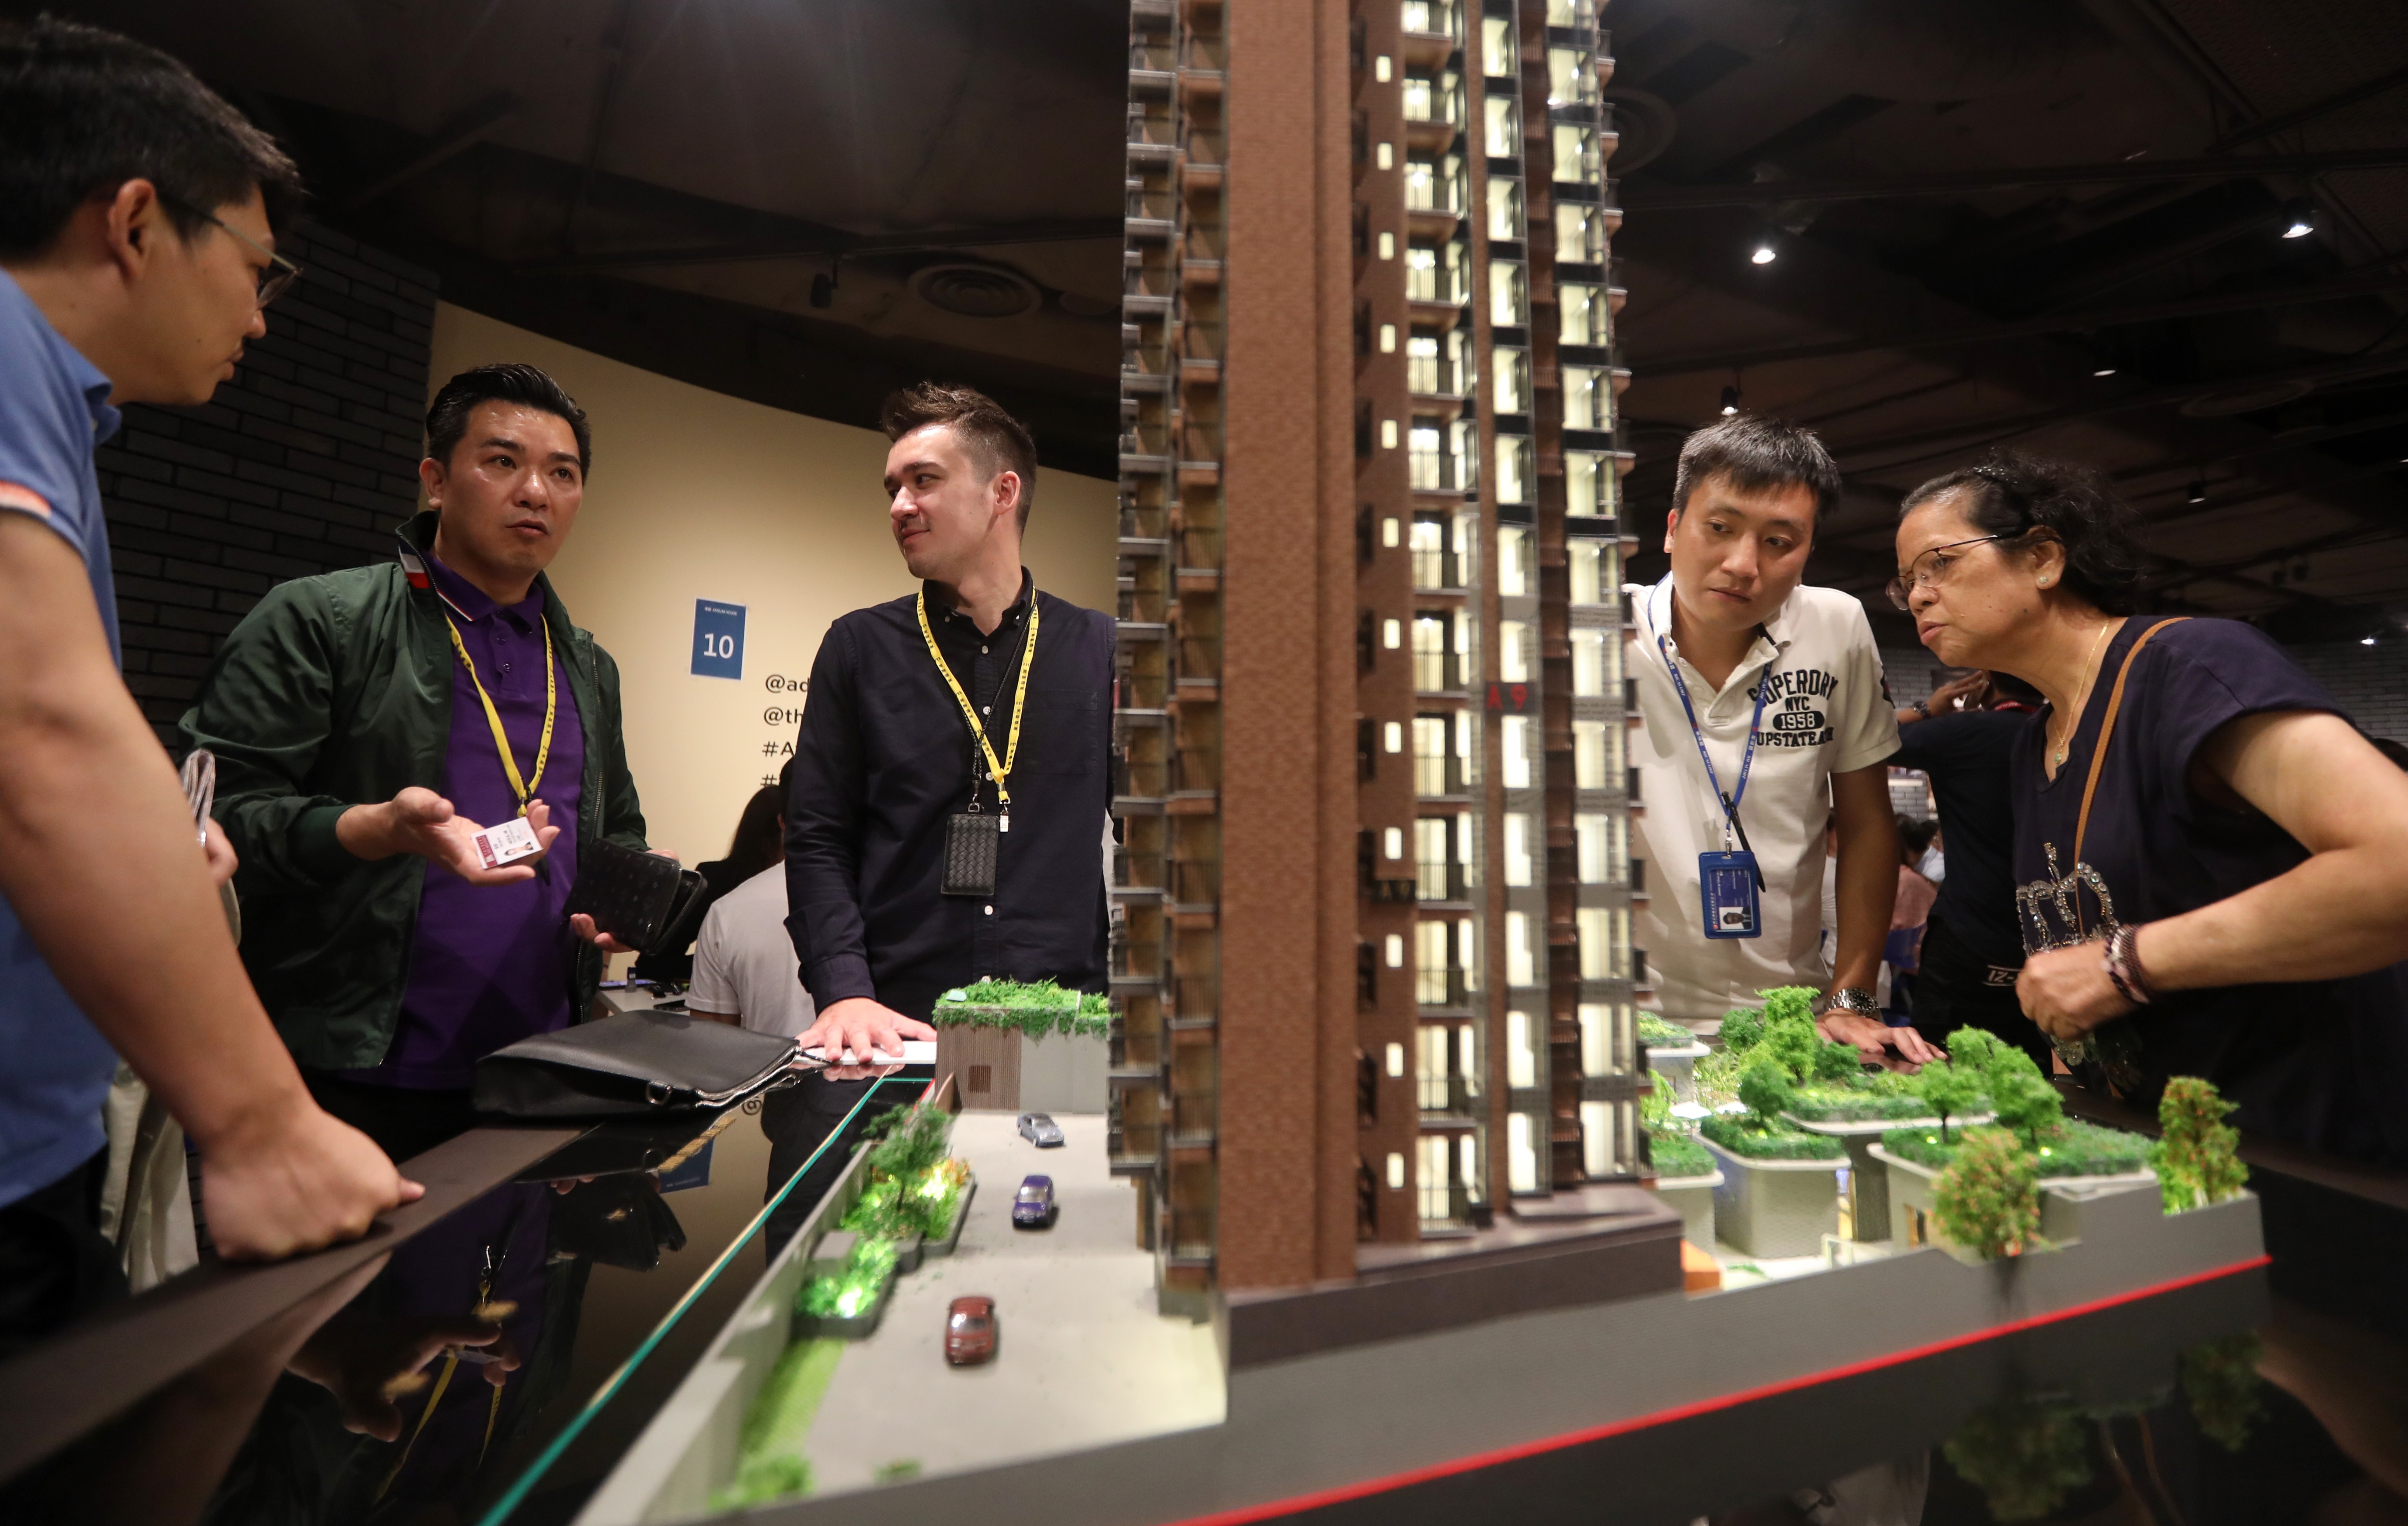 Potential buyers viewing a model of New World Development's Atrium House project on 22 June 2019. Photo: SCMP / Xiaomei Chen